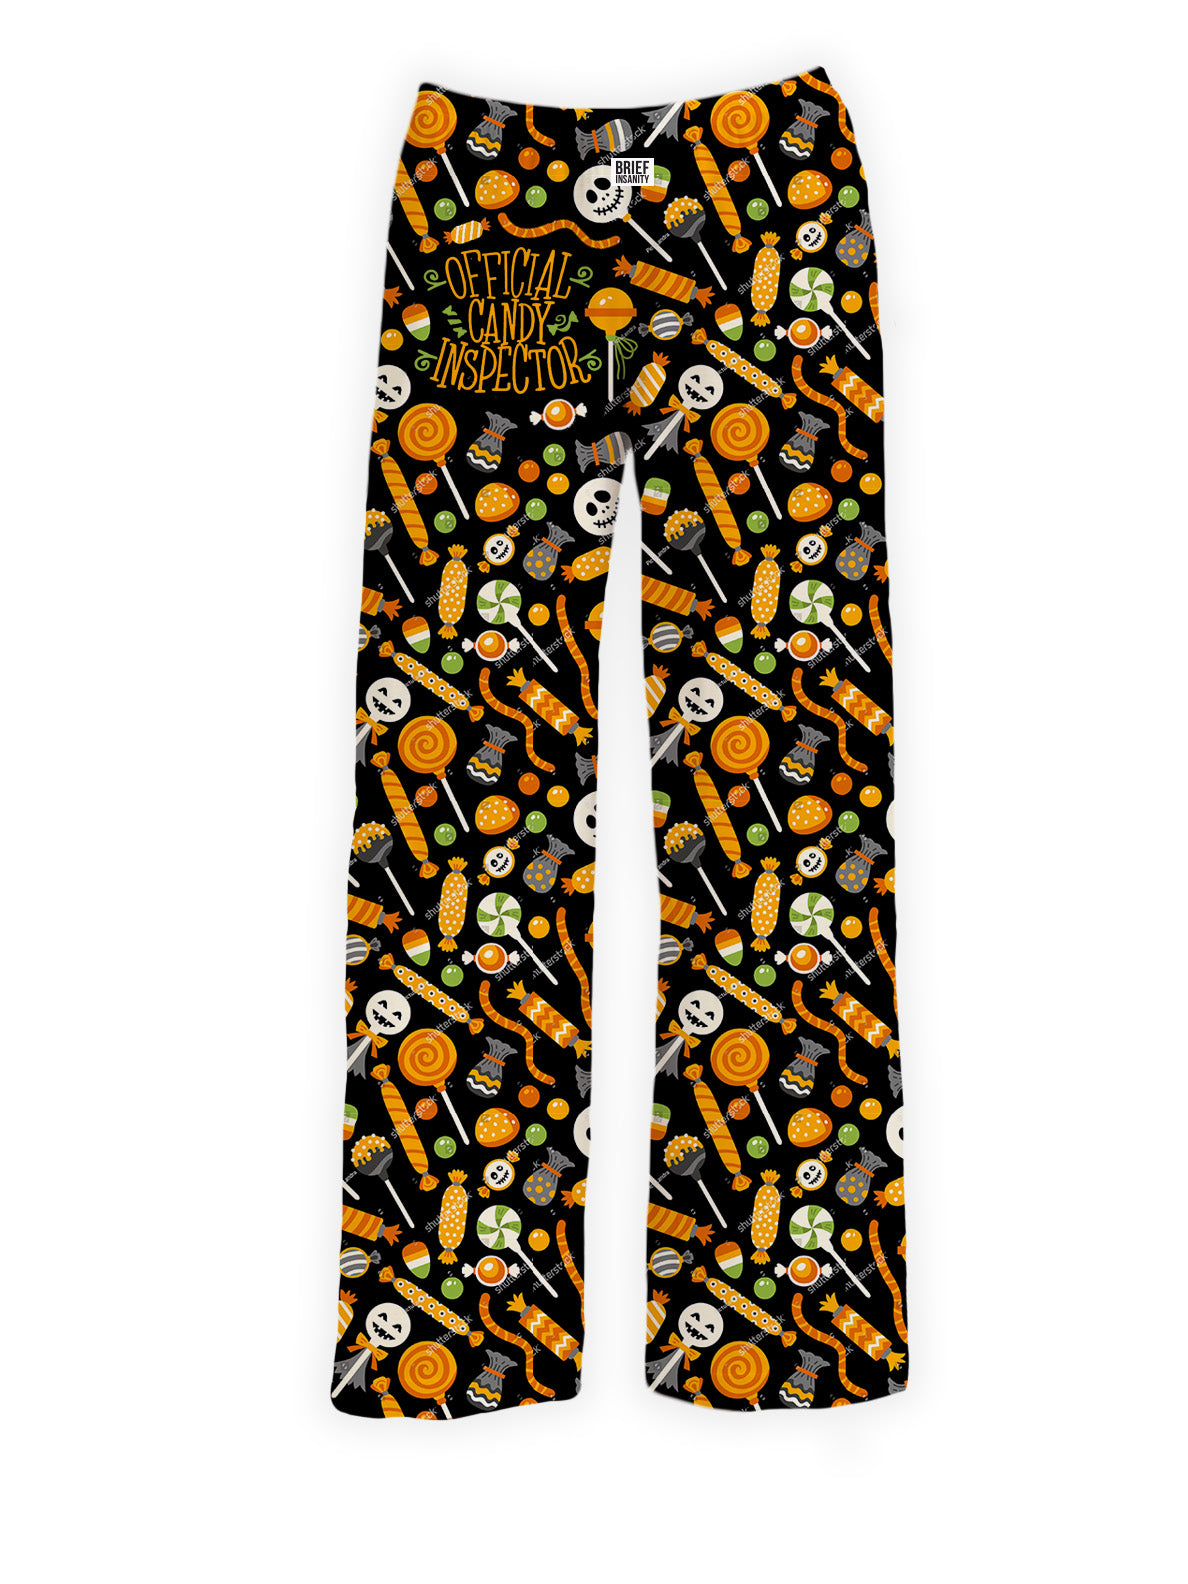 Official Candy Inspector Lounge Pants